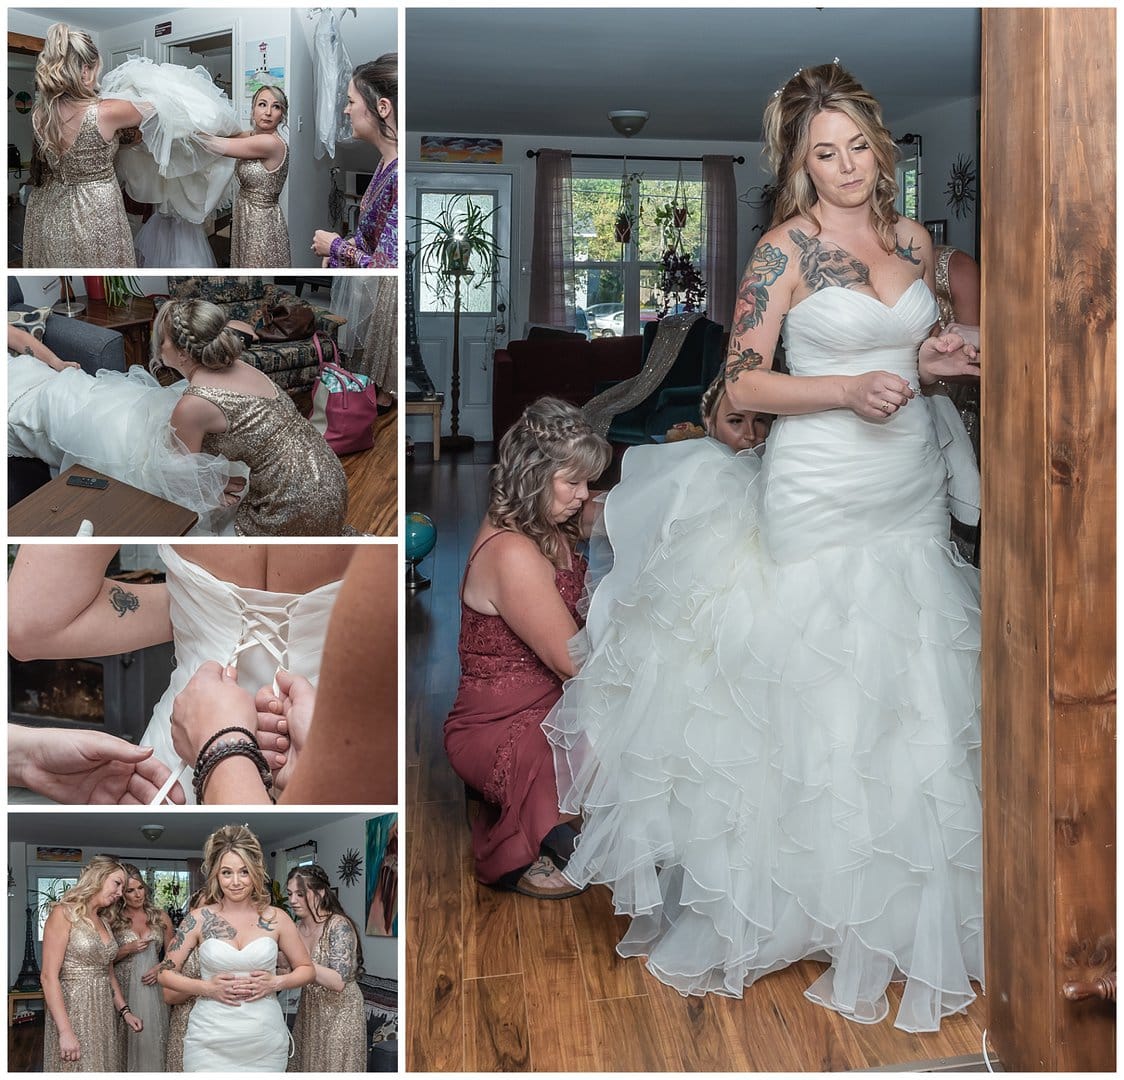 The bride gets into her wedding gown during her bridal prep.